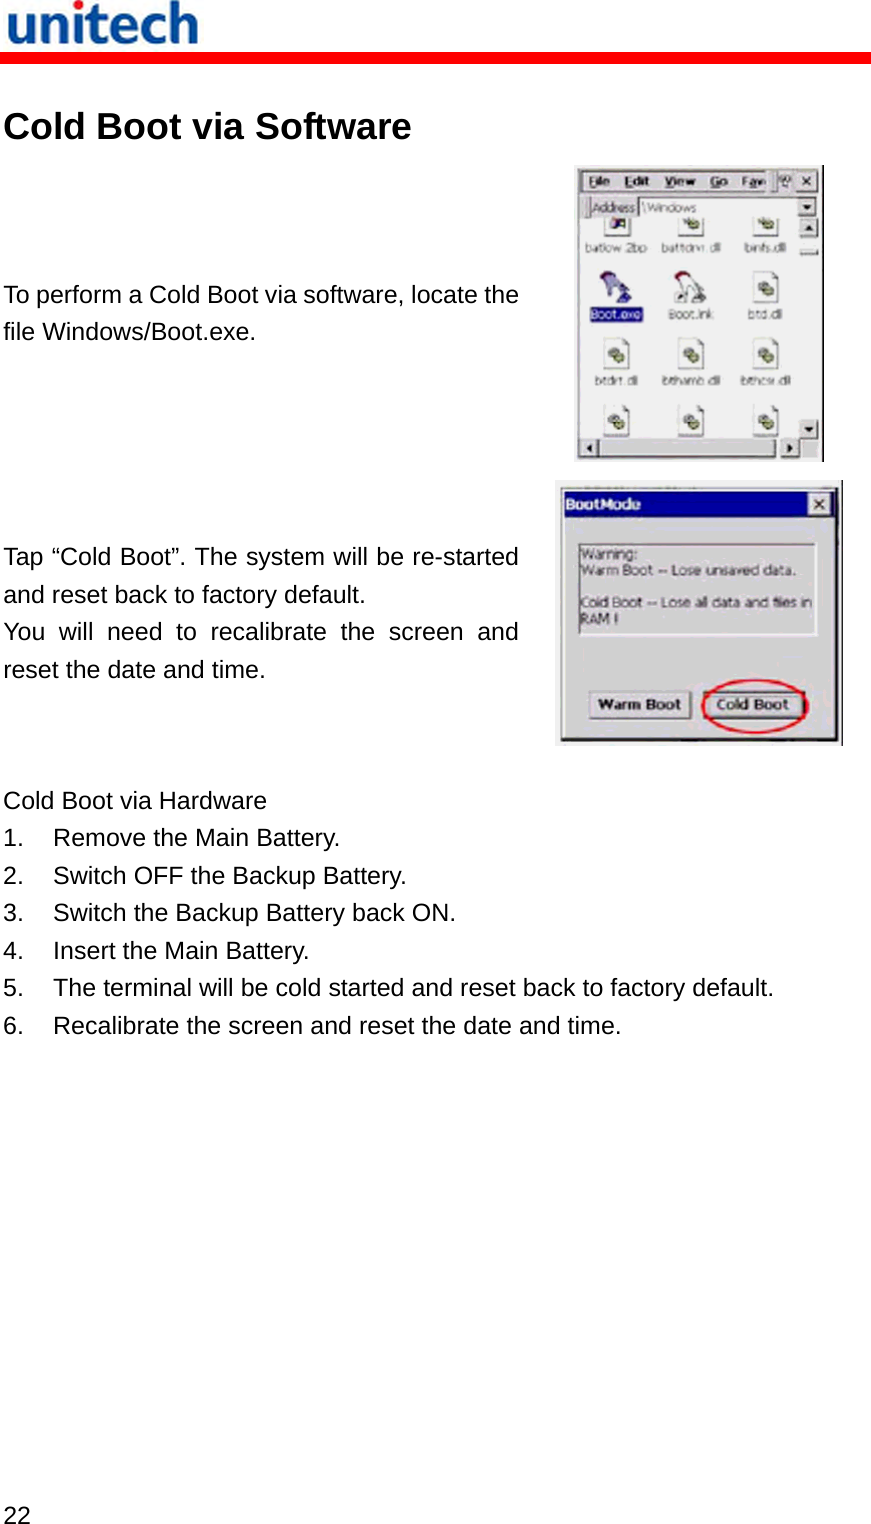   22  Cold Boot via Software To perform a Cold Boot via software, locate the file Windows/Boot.exe.  Tap “Cold Boot”. The system will be re-started and reset back to factory default. You will need to recalibrate the screen and reset the date and time.  Cold Boot via Hardware 1.  Remove the Main Battery. 2.  Switch OFF the Backup Battery. 3.  Switch the Backup Battery back ON. 4.  Insert the Main Battery. 5.  The terminal will be cold started and reset back to factory default. 6.  Recalibrate the screen and reset the date and time. 